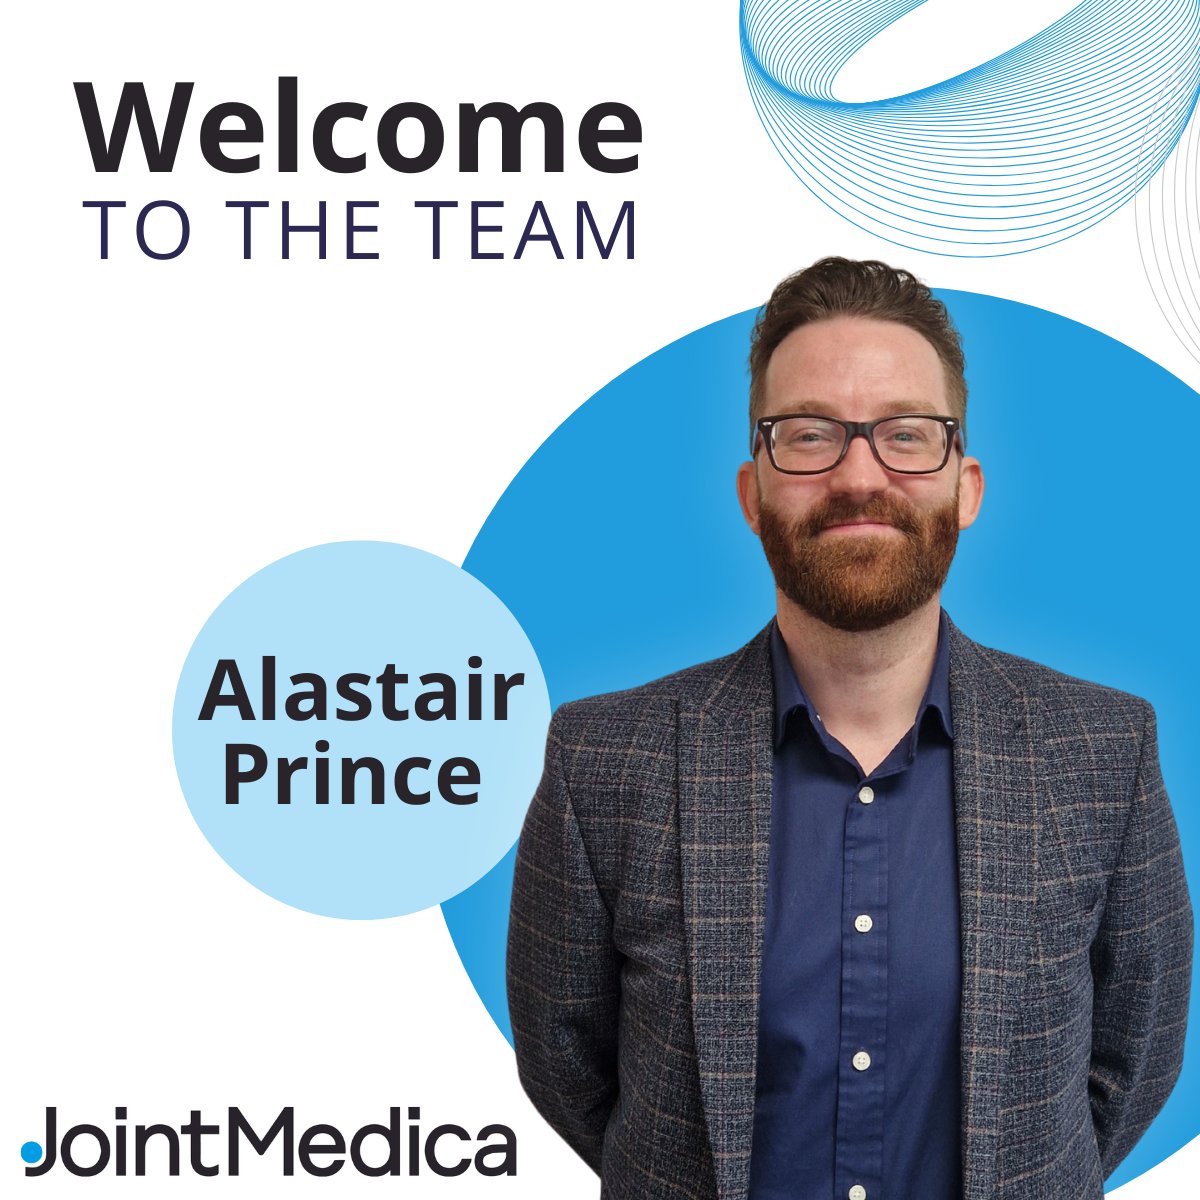 We are delighted to announce the recent appointment of Alastair Prince to the JointMedica team as Vice President – Finance. Originally practice trained with exposure to audit and corporate tax, Alastair transitioned into industry around 10 years ago, working for companies such